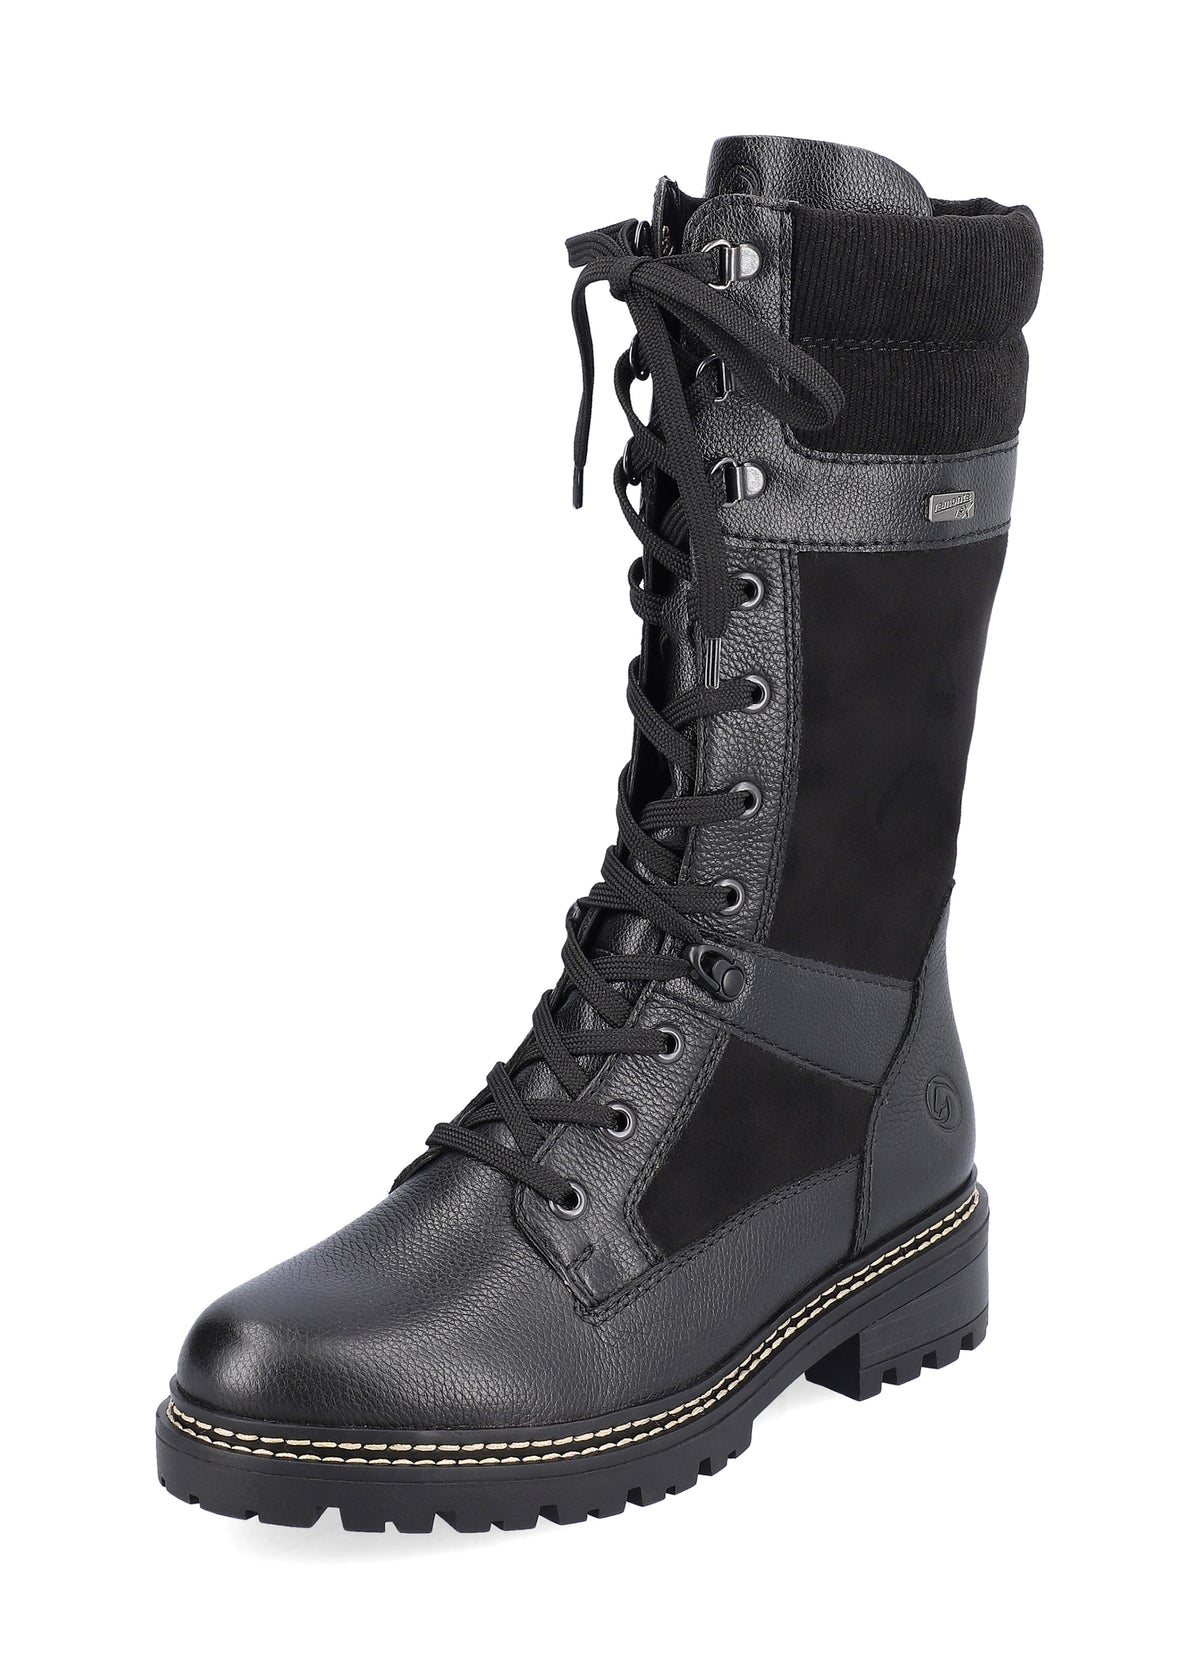 Winter boots with friction sole - black, Remonte-TEX